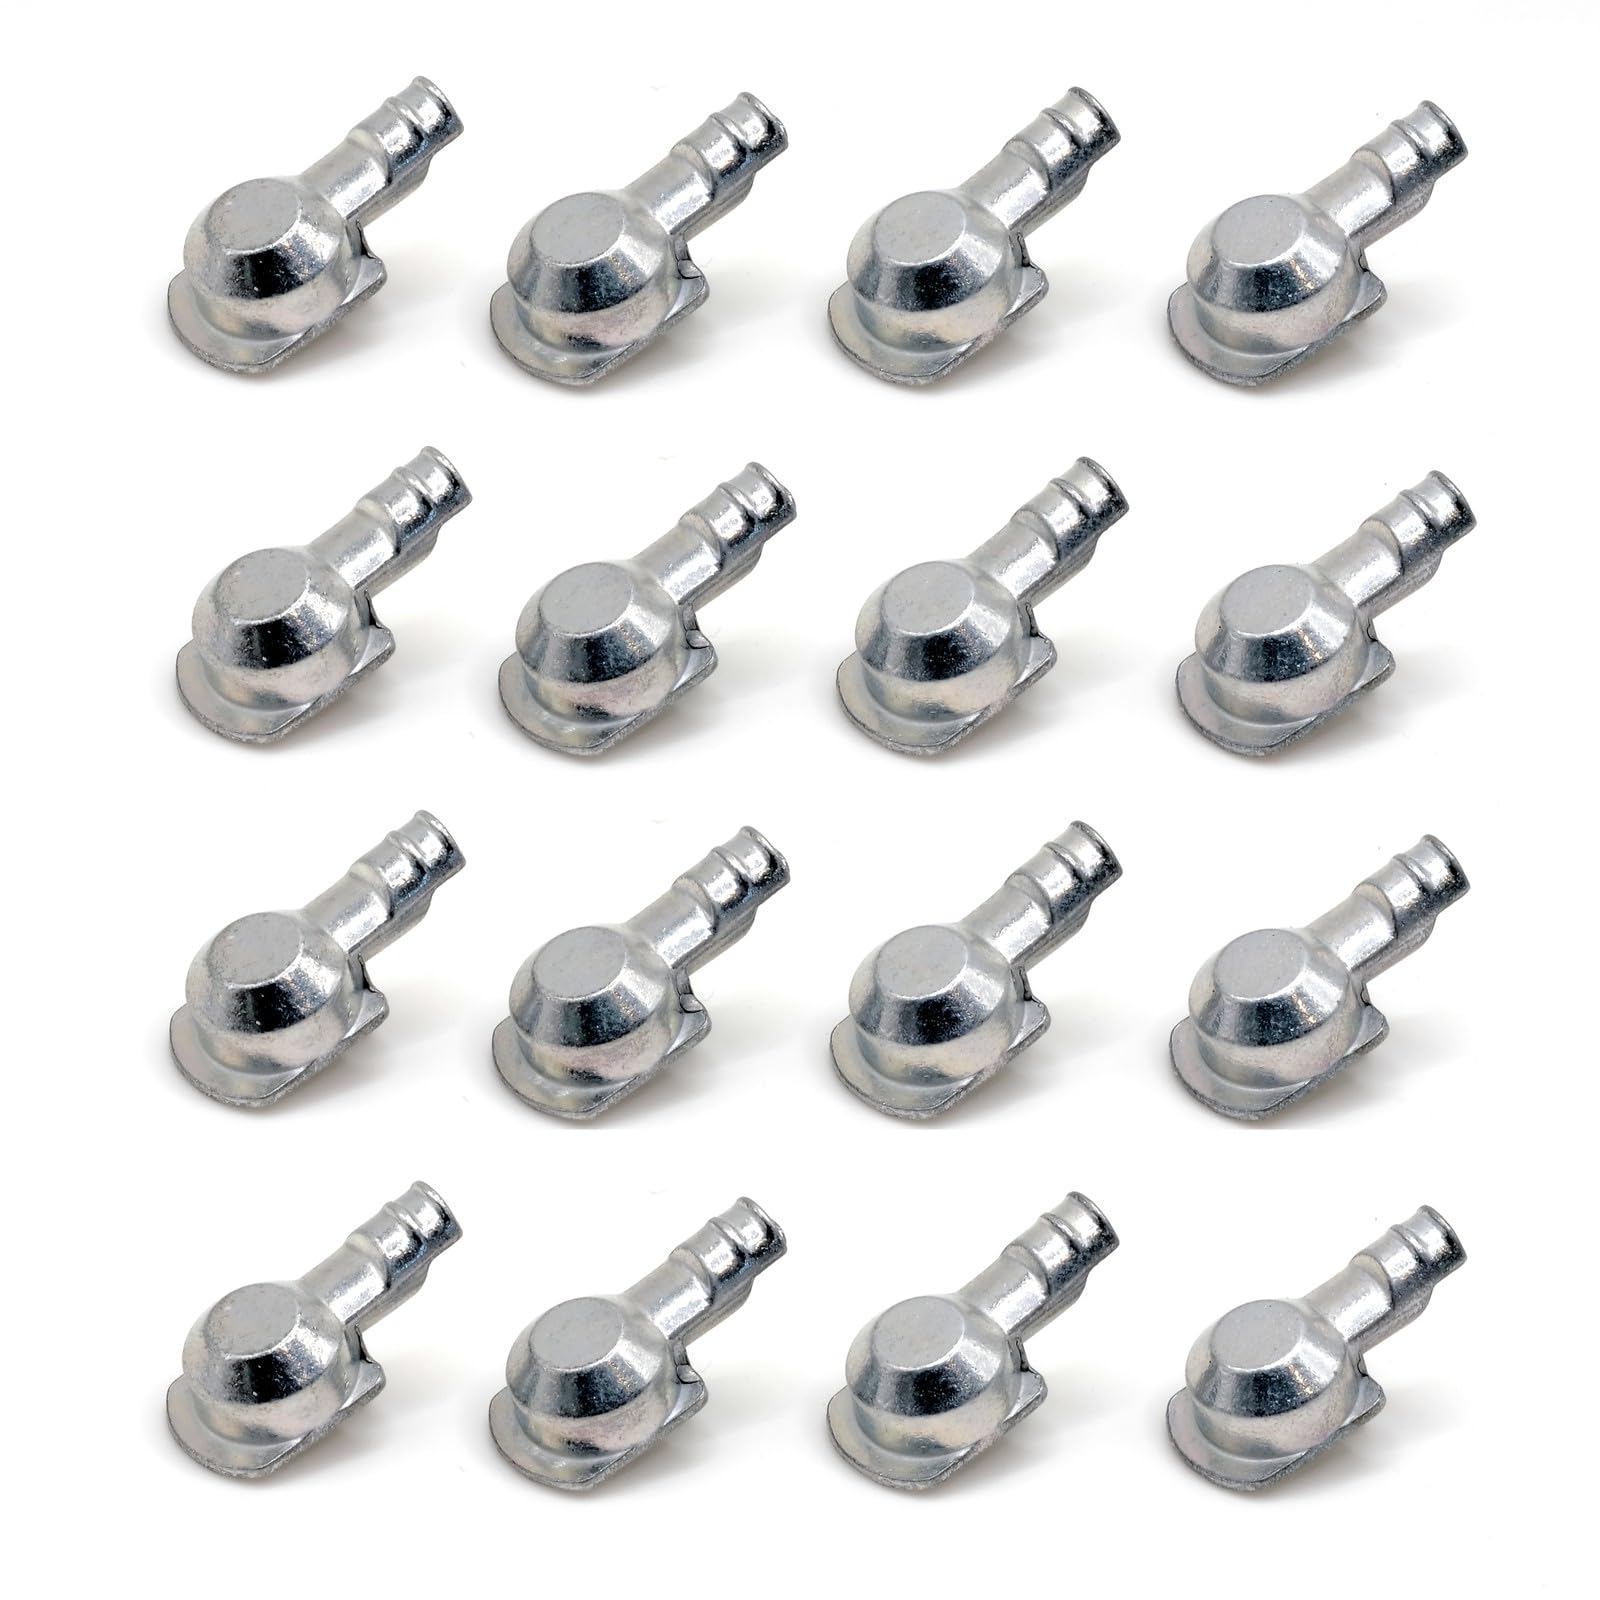 ReplacementScrews Shelf Support Pins Compatible with IKEA Part 121762 (Old Billy Bookshelf - pre 2013) - Zinc Alloy Die-Cast Shelf Pegs (Pack of 16)